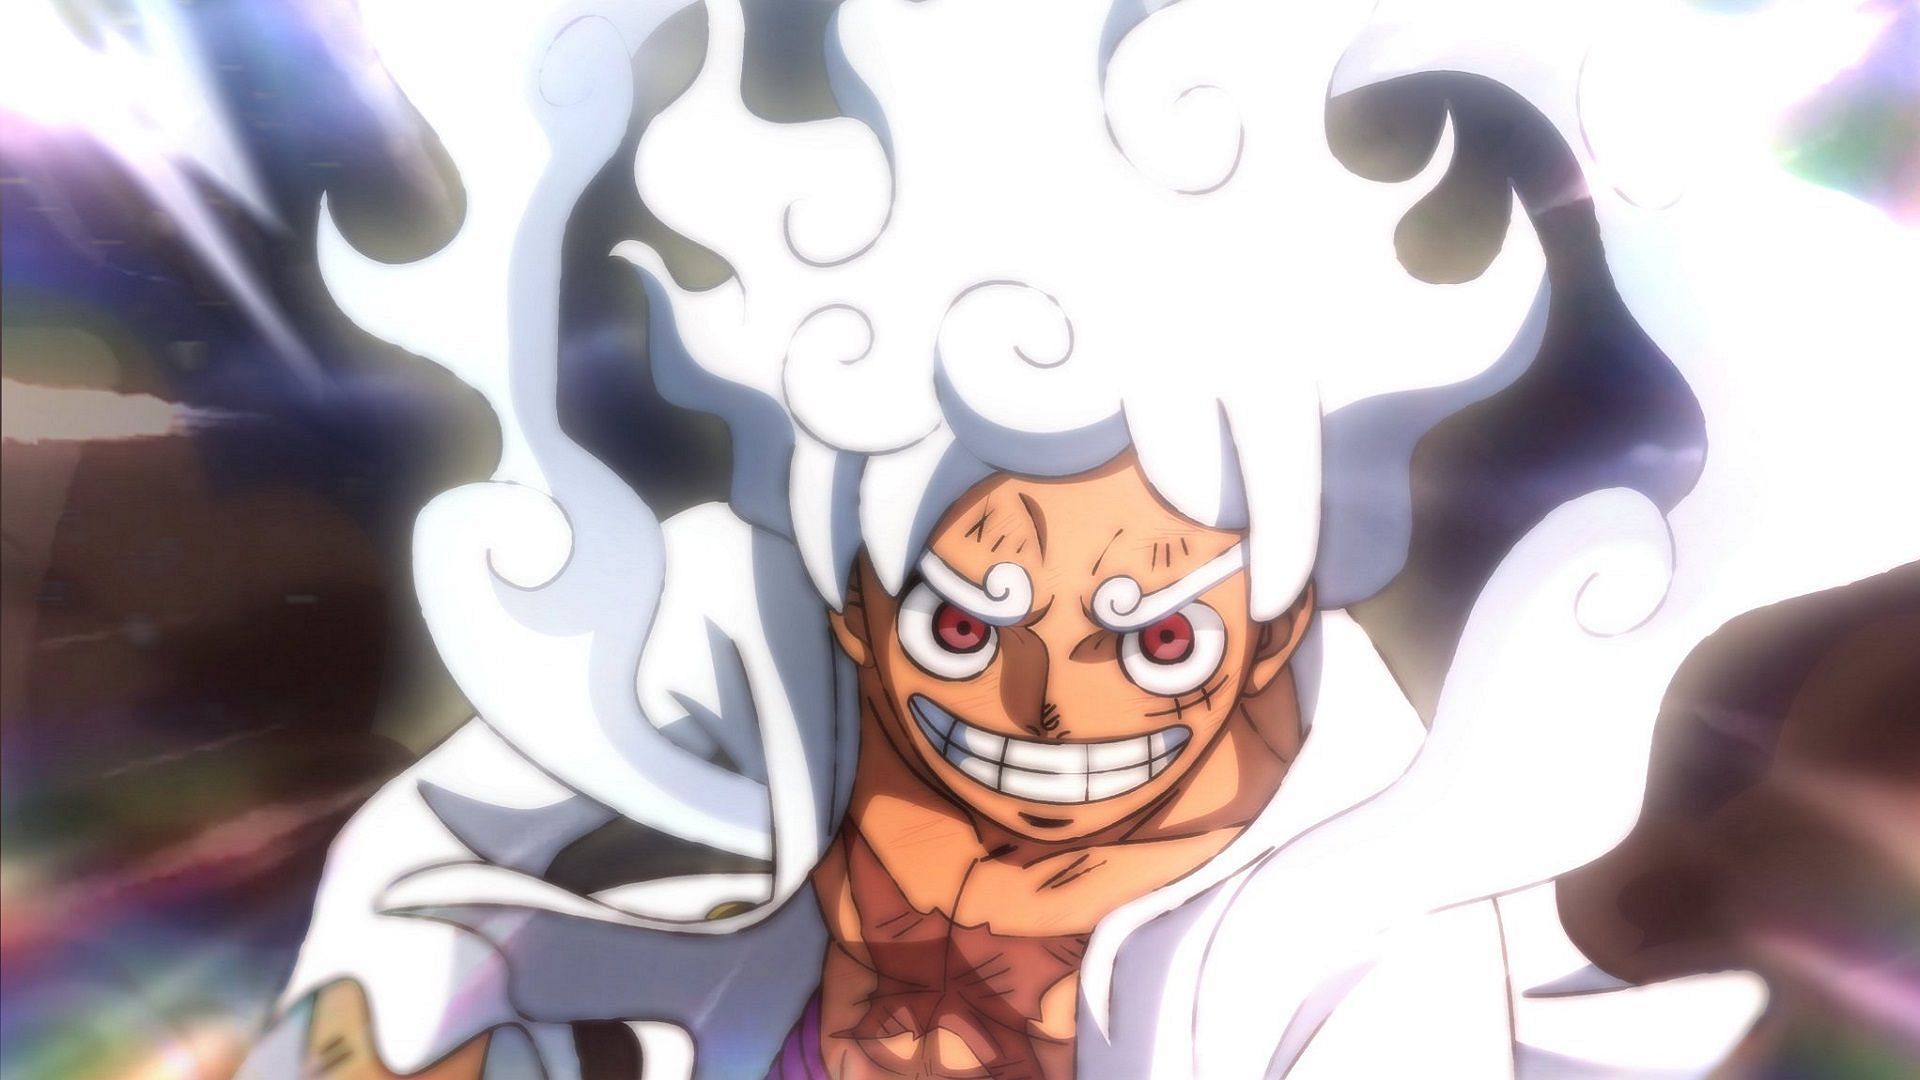 One Piece Day 2023: Gear 5 teaser, anime themes, & more - Dexerto